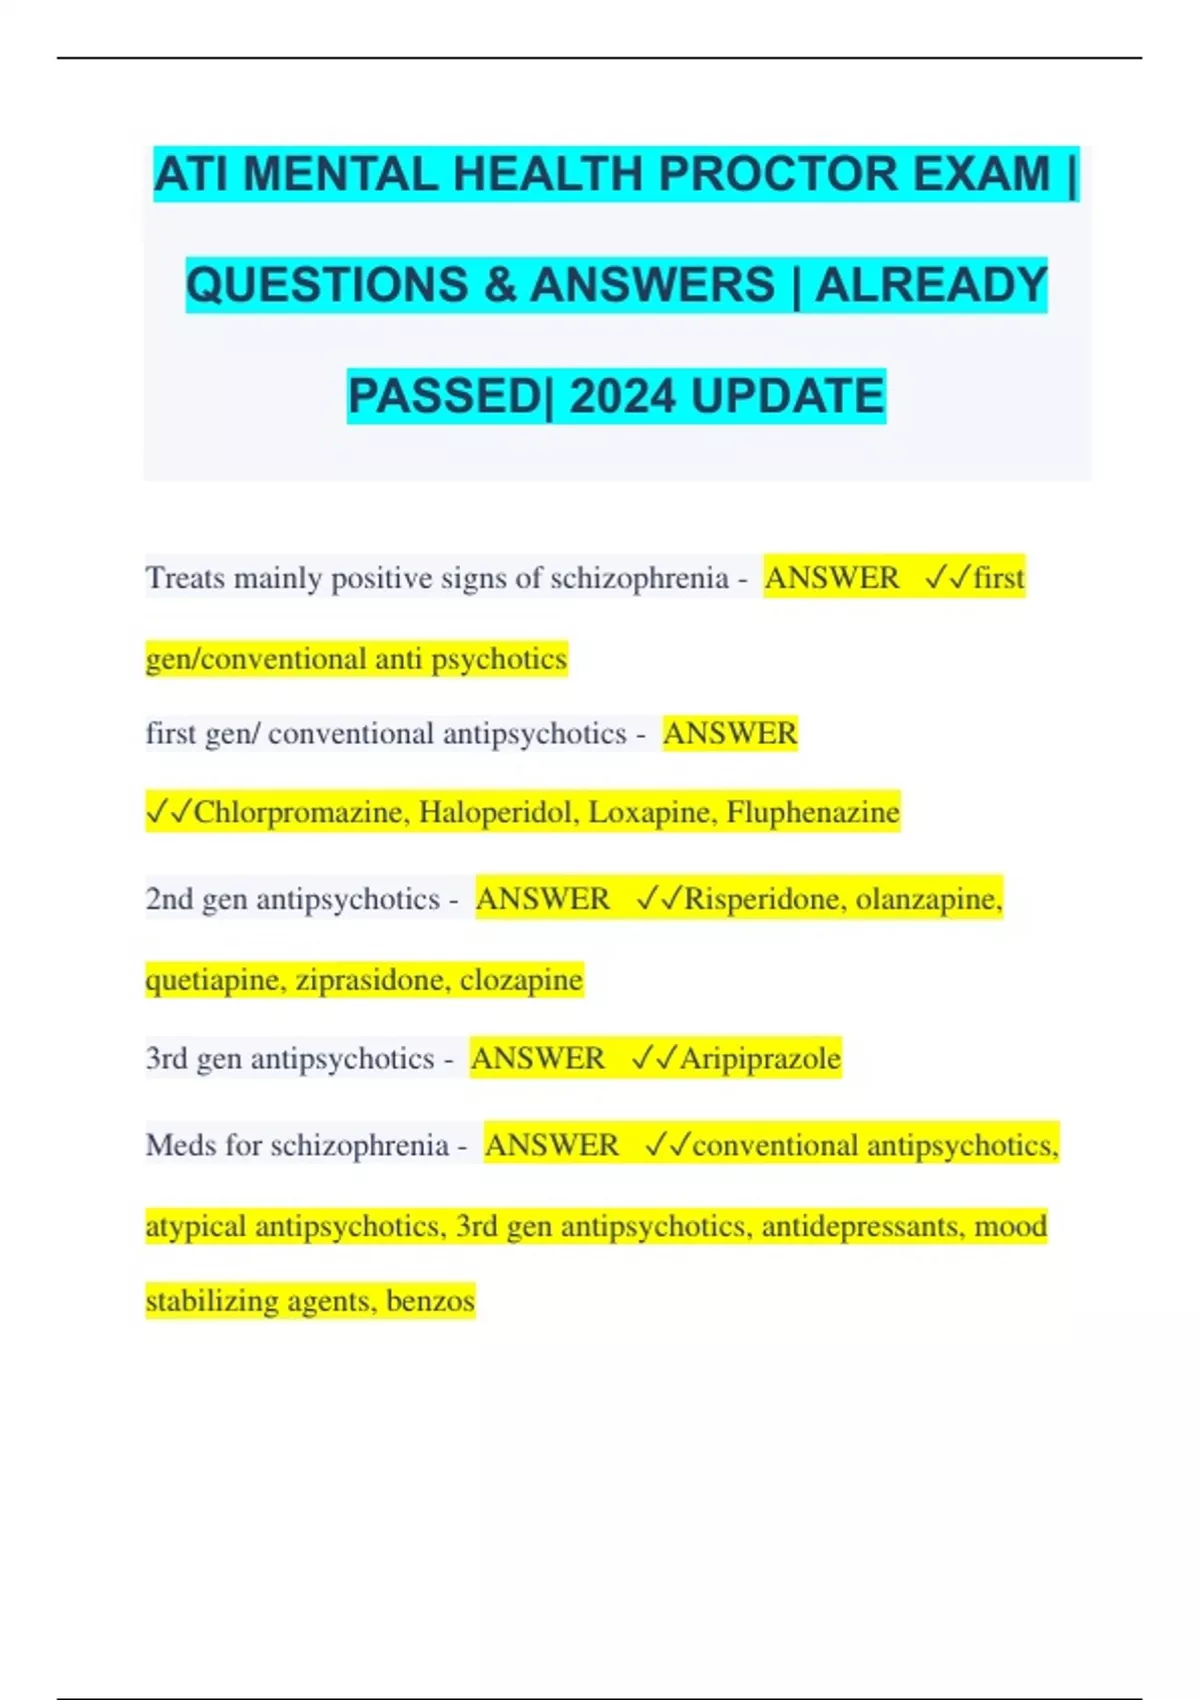 ATI MENTAL HEALTH PROCTOR EXAM QUESTIONS & ANSWERS ALREADY PASSED